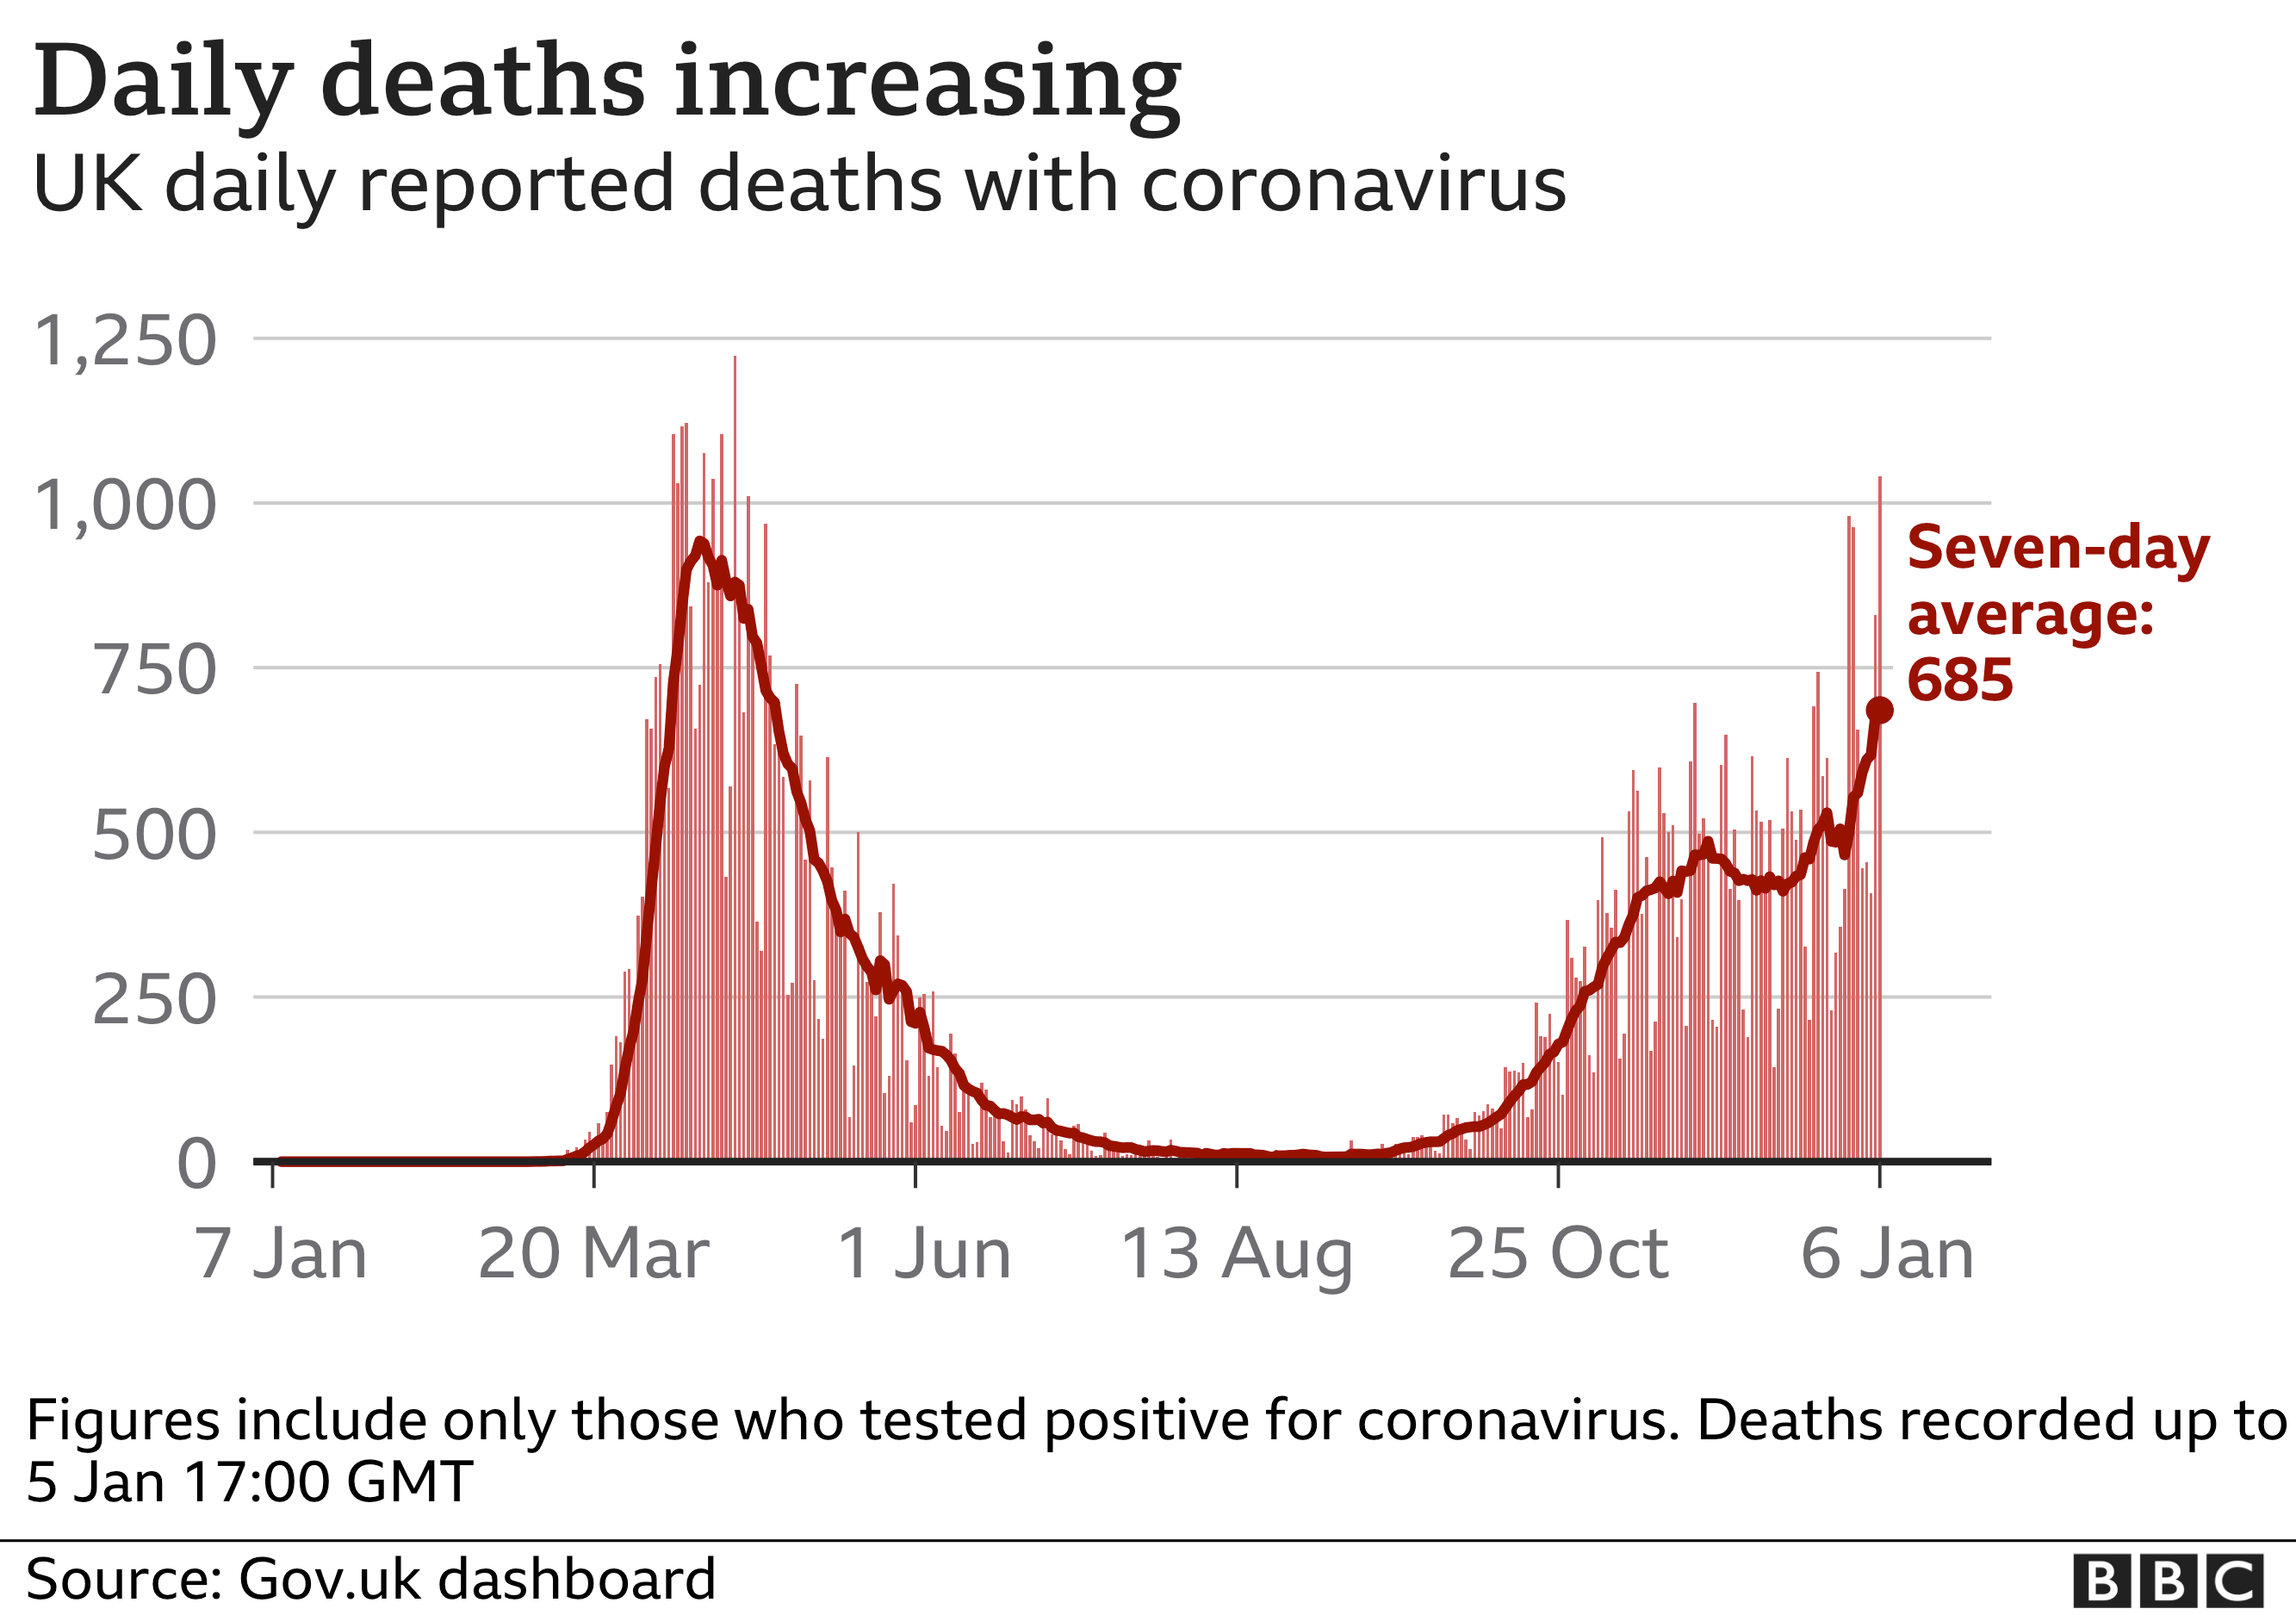 Chart shows daily deaths are continuing to increase